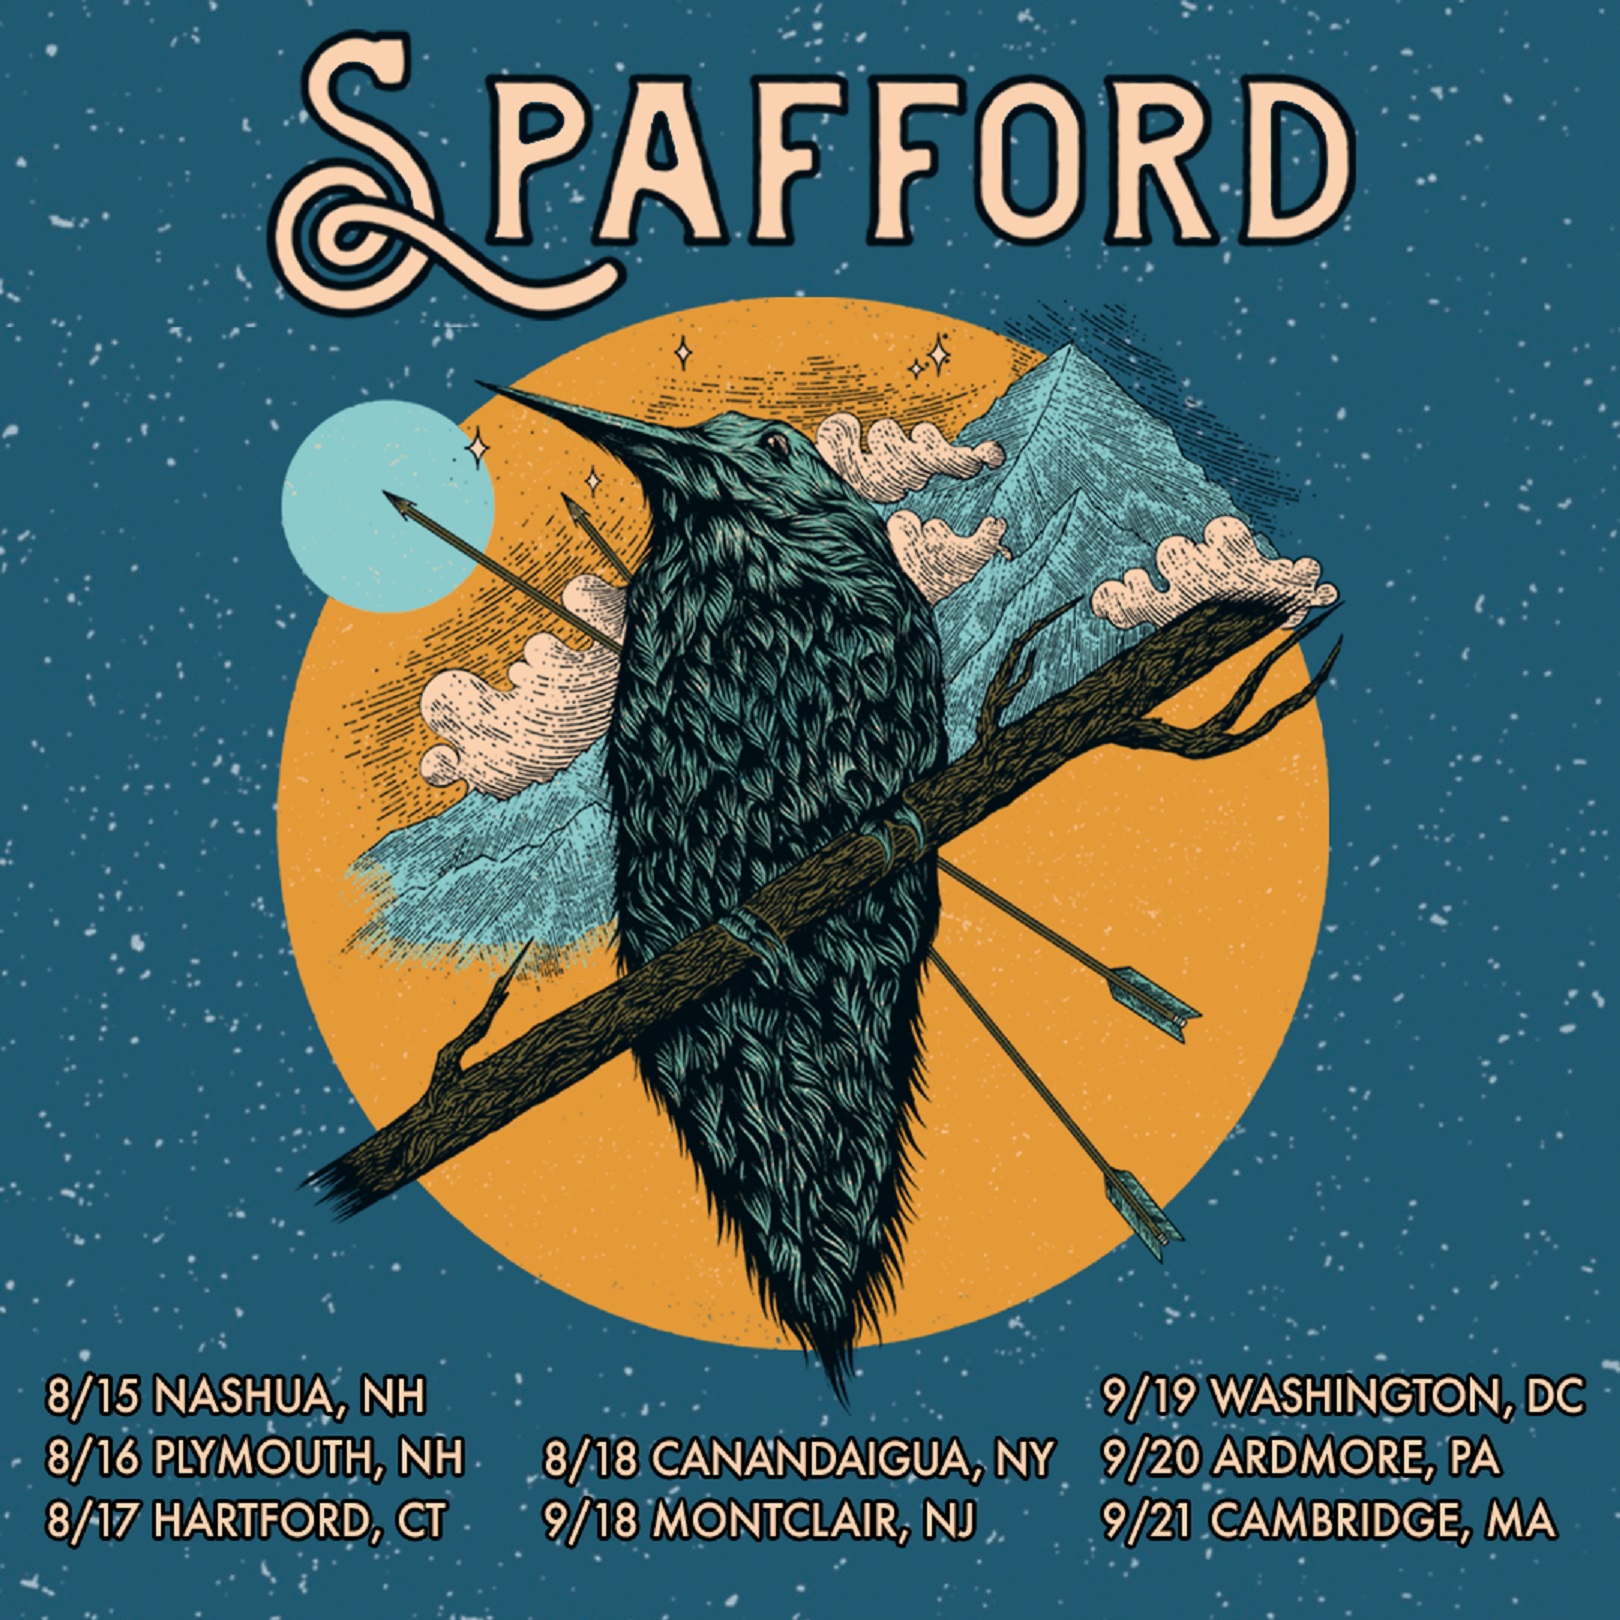 Spafford Announces New Tour Dates for August and September